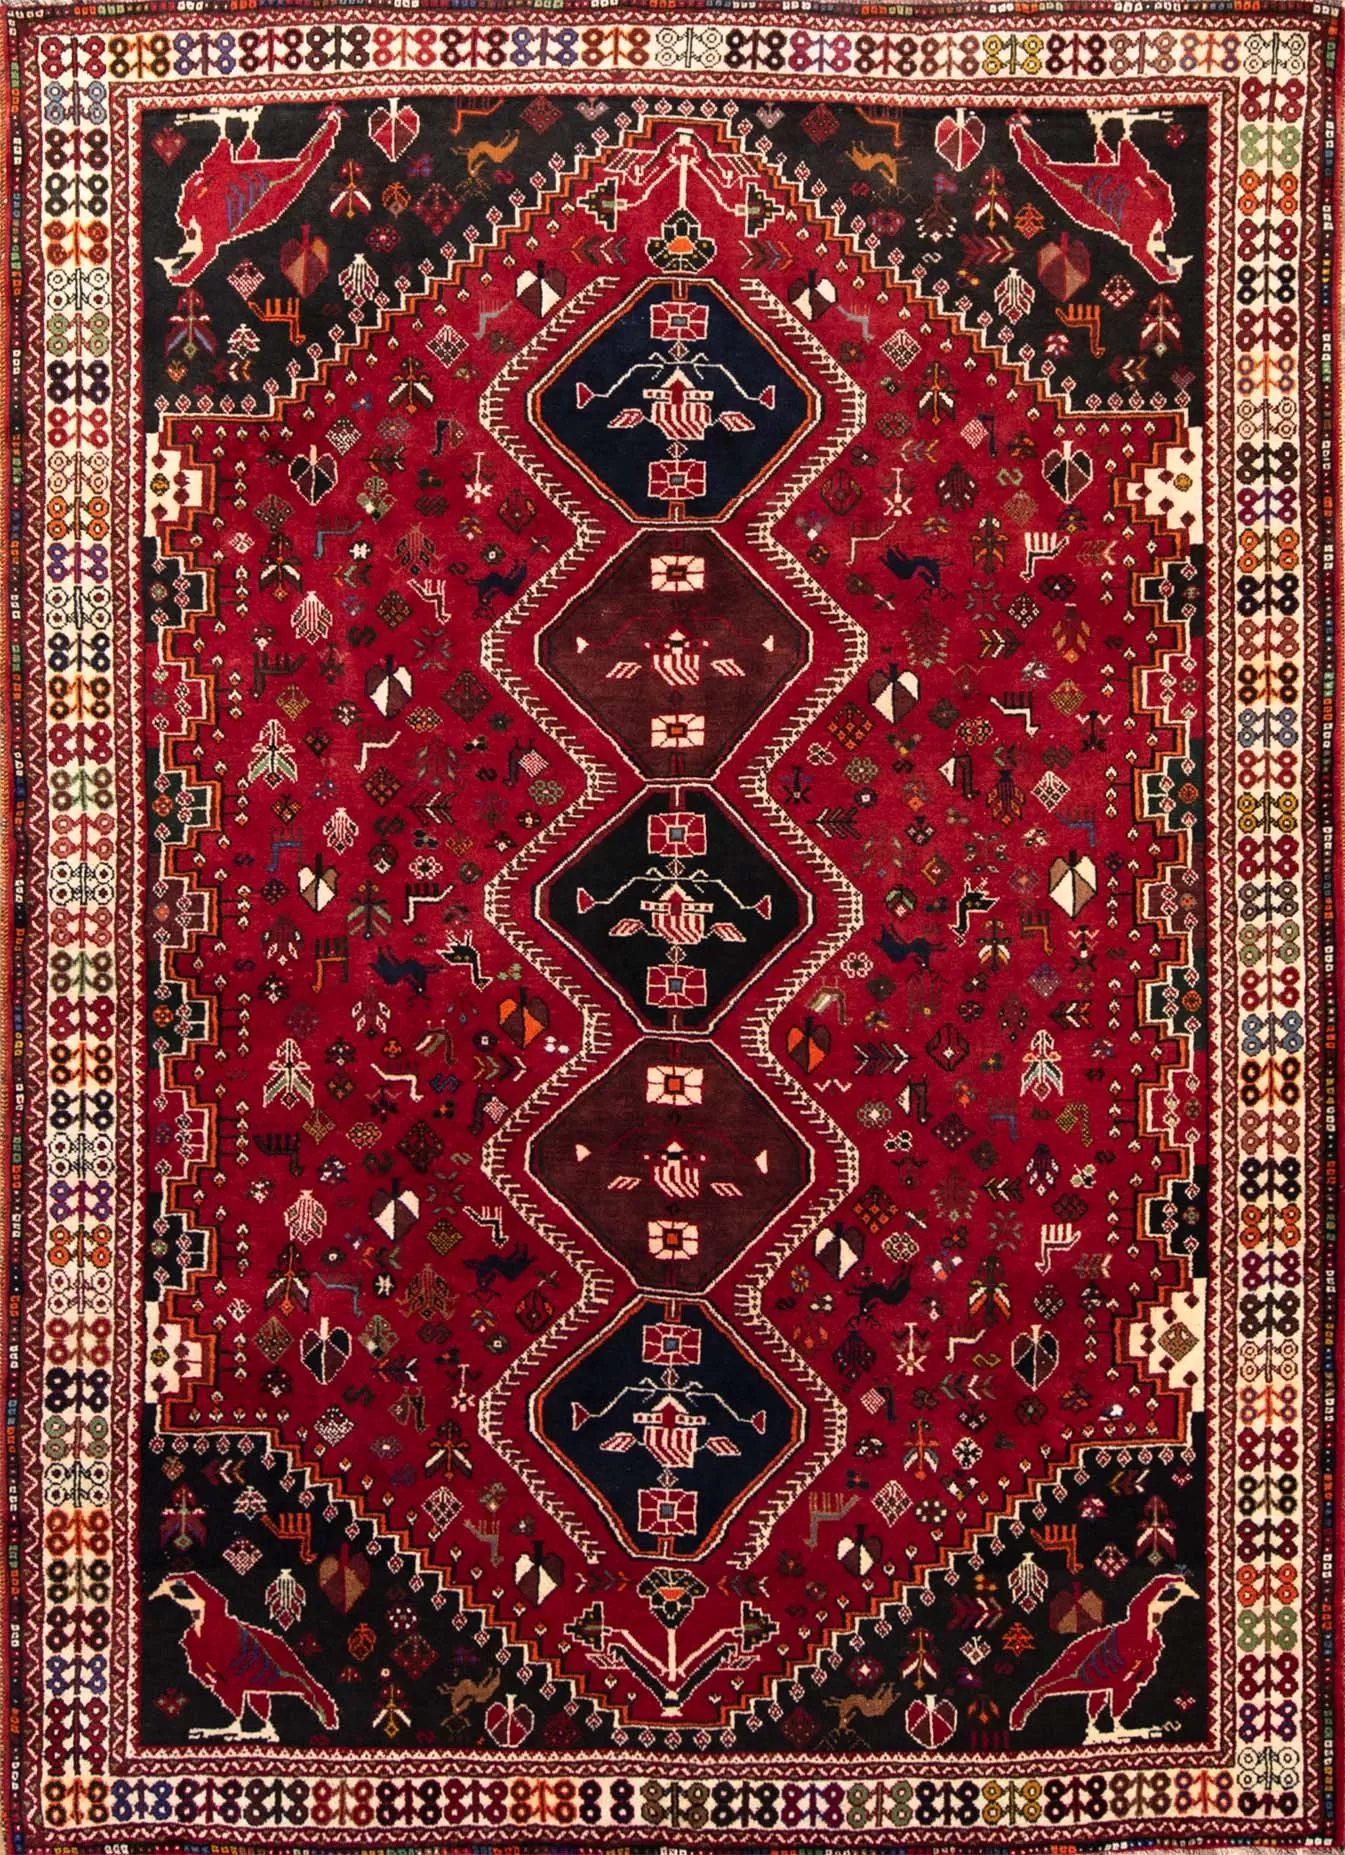 Thick area rug. Handmade southwestern design wool Persian Shiraz area rug in red color. Size 7.6x10.4.